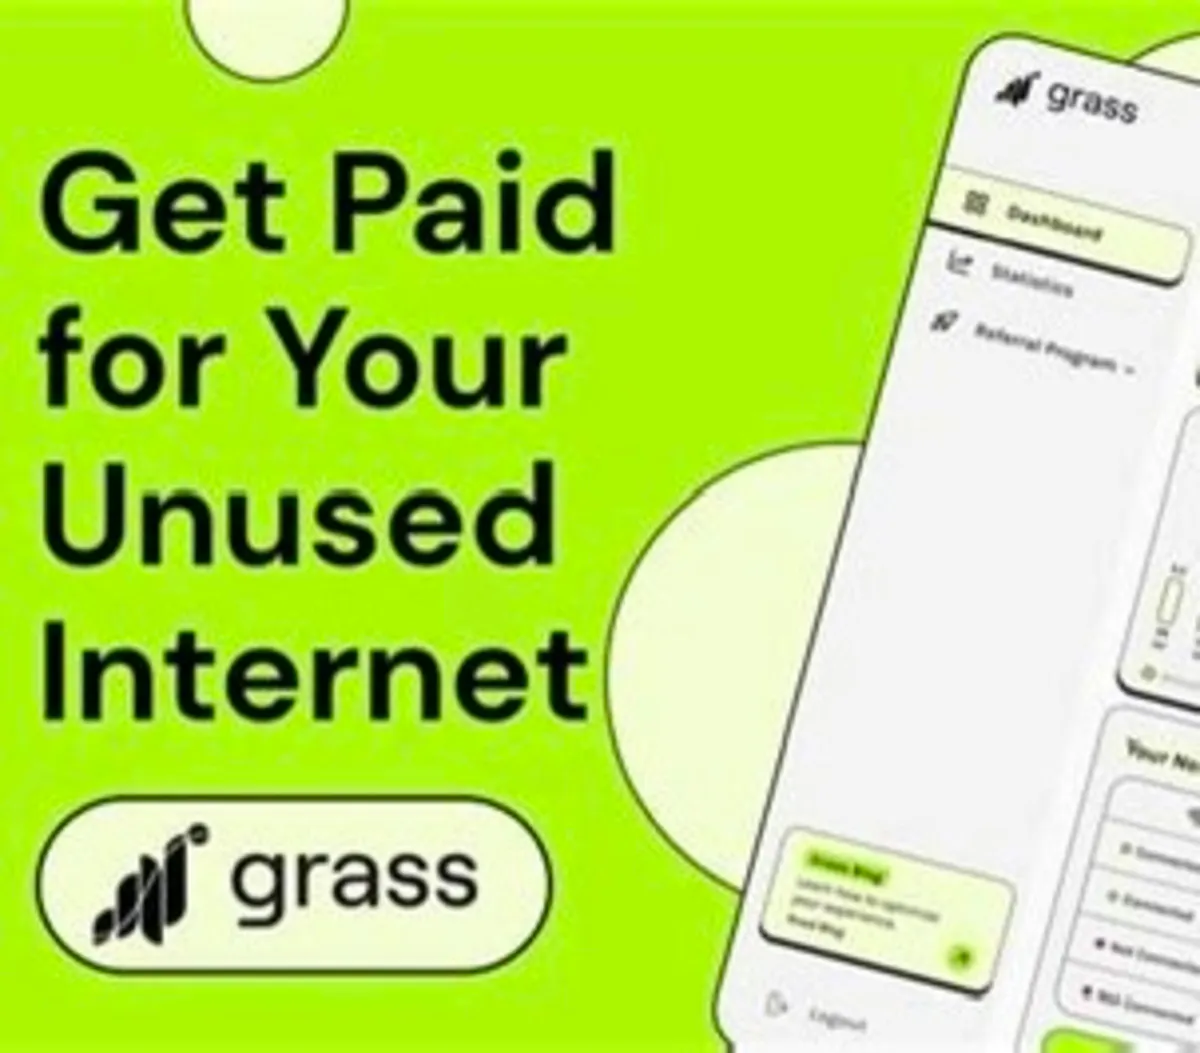 Get paid for your unused broadband